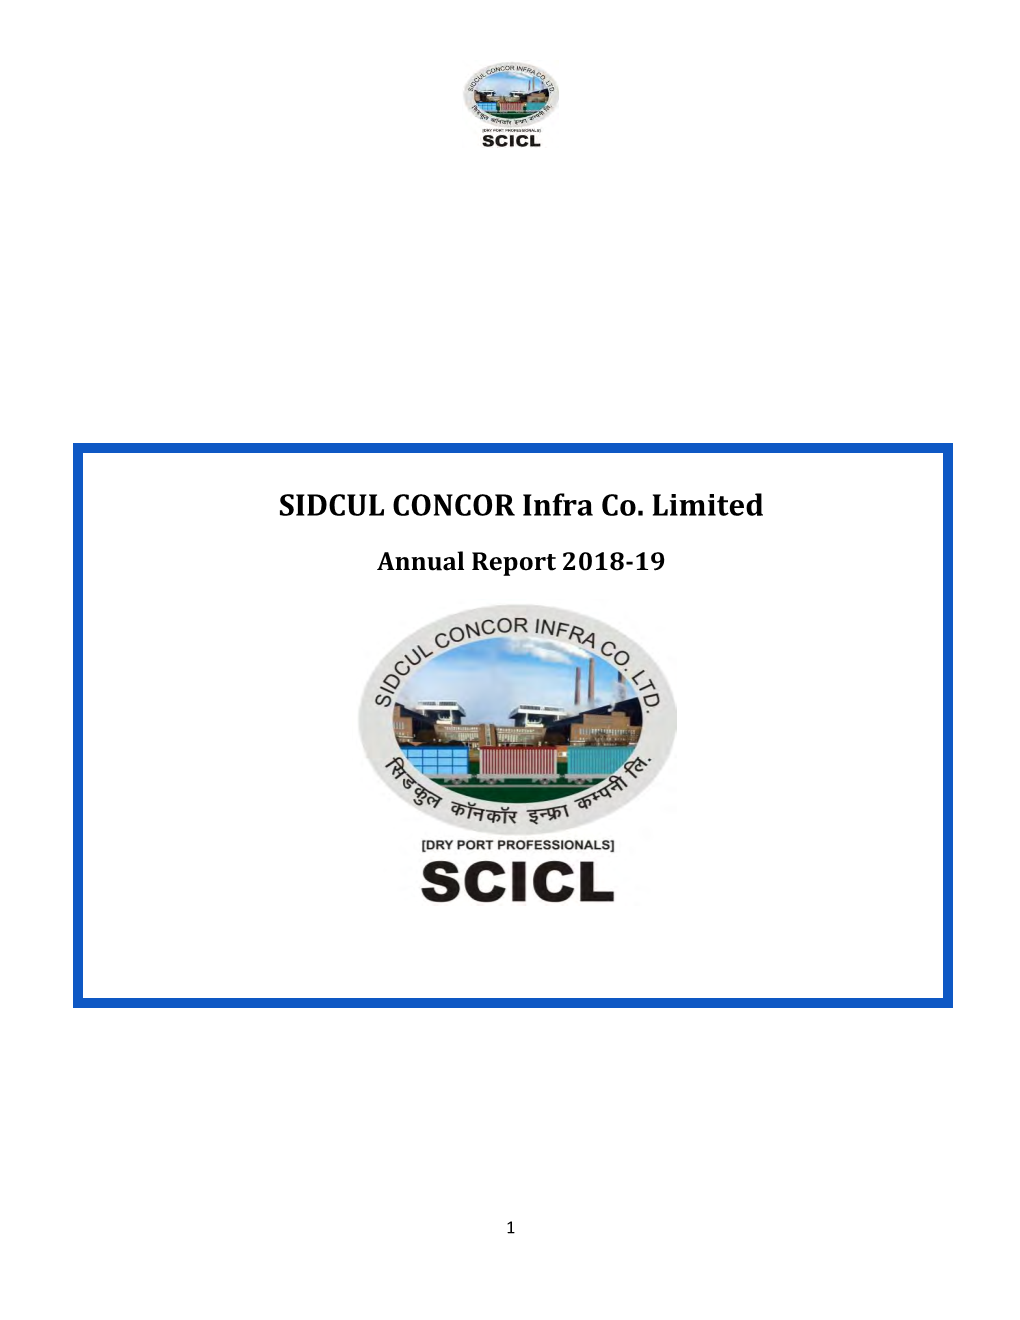 SIDCUL CONCOR Infra Co. Limited